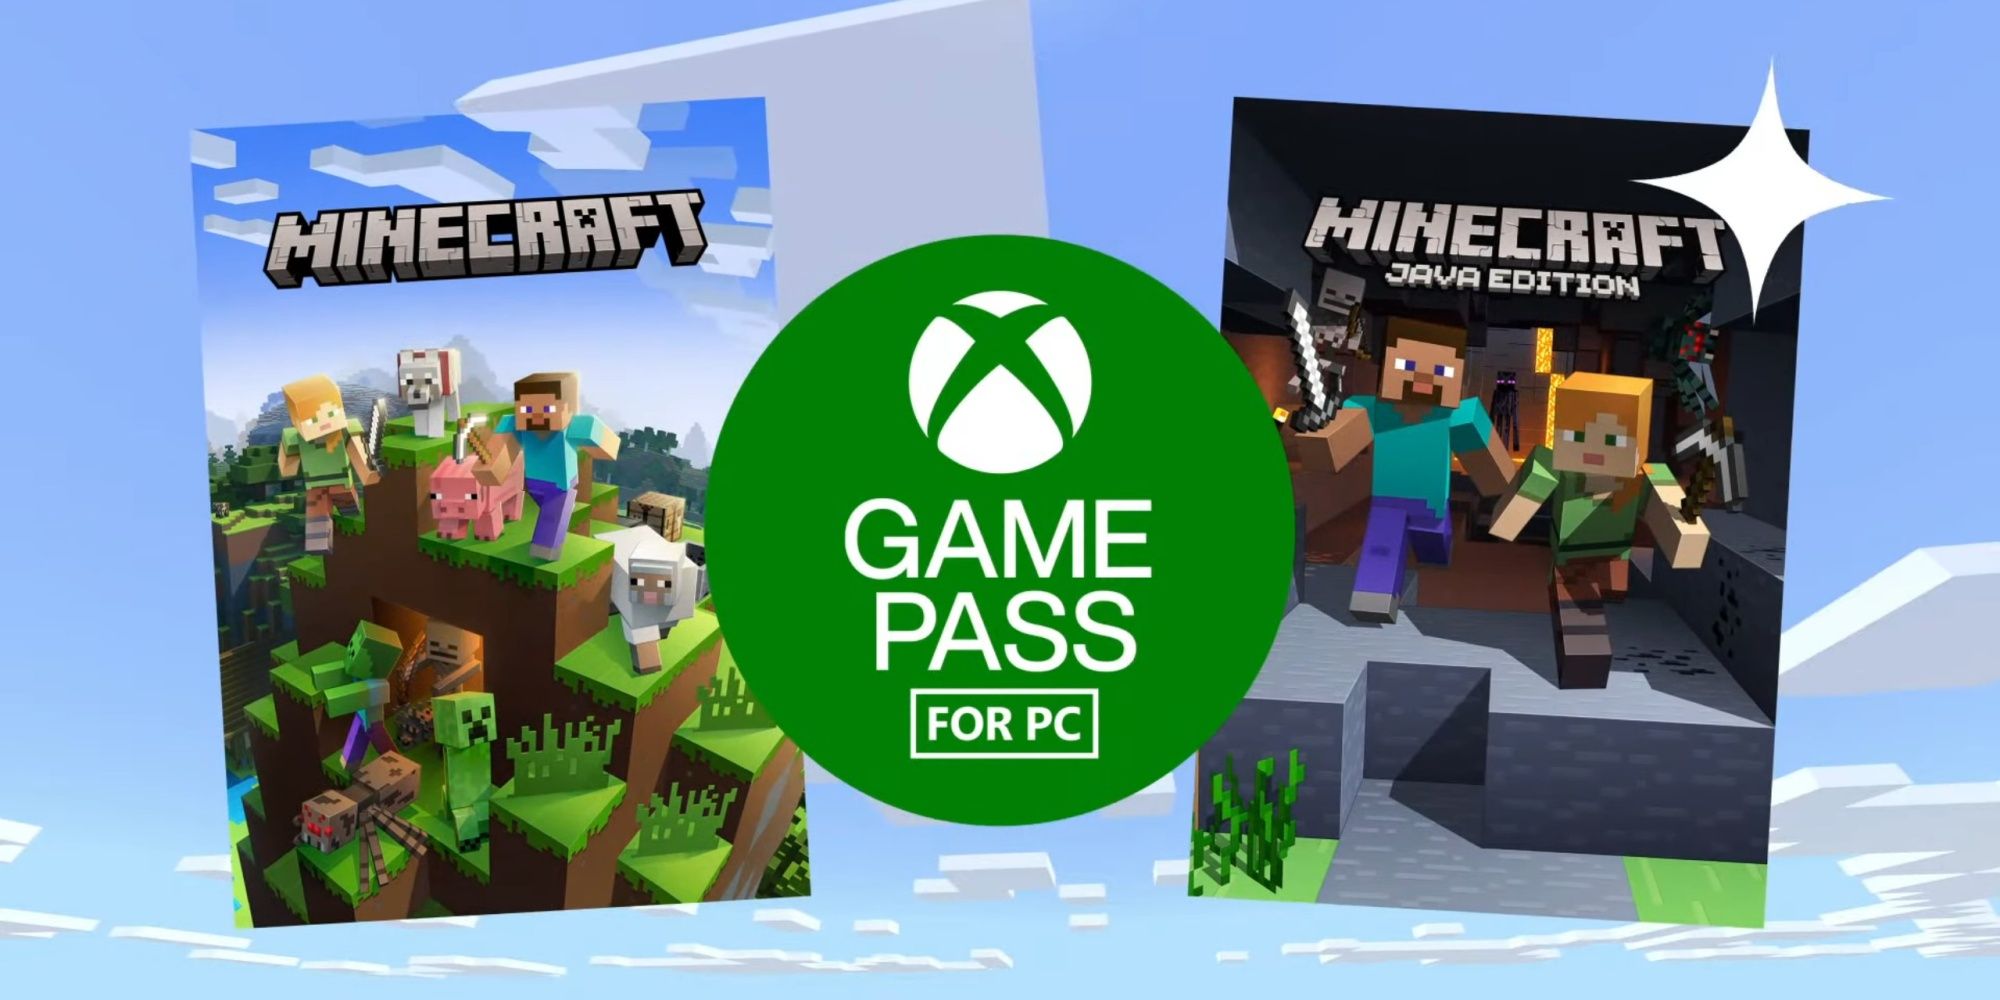 Minecraft Bedrock and Java Editions for Xbox Game Pass for PC